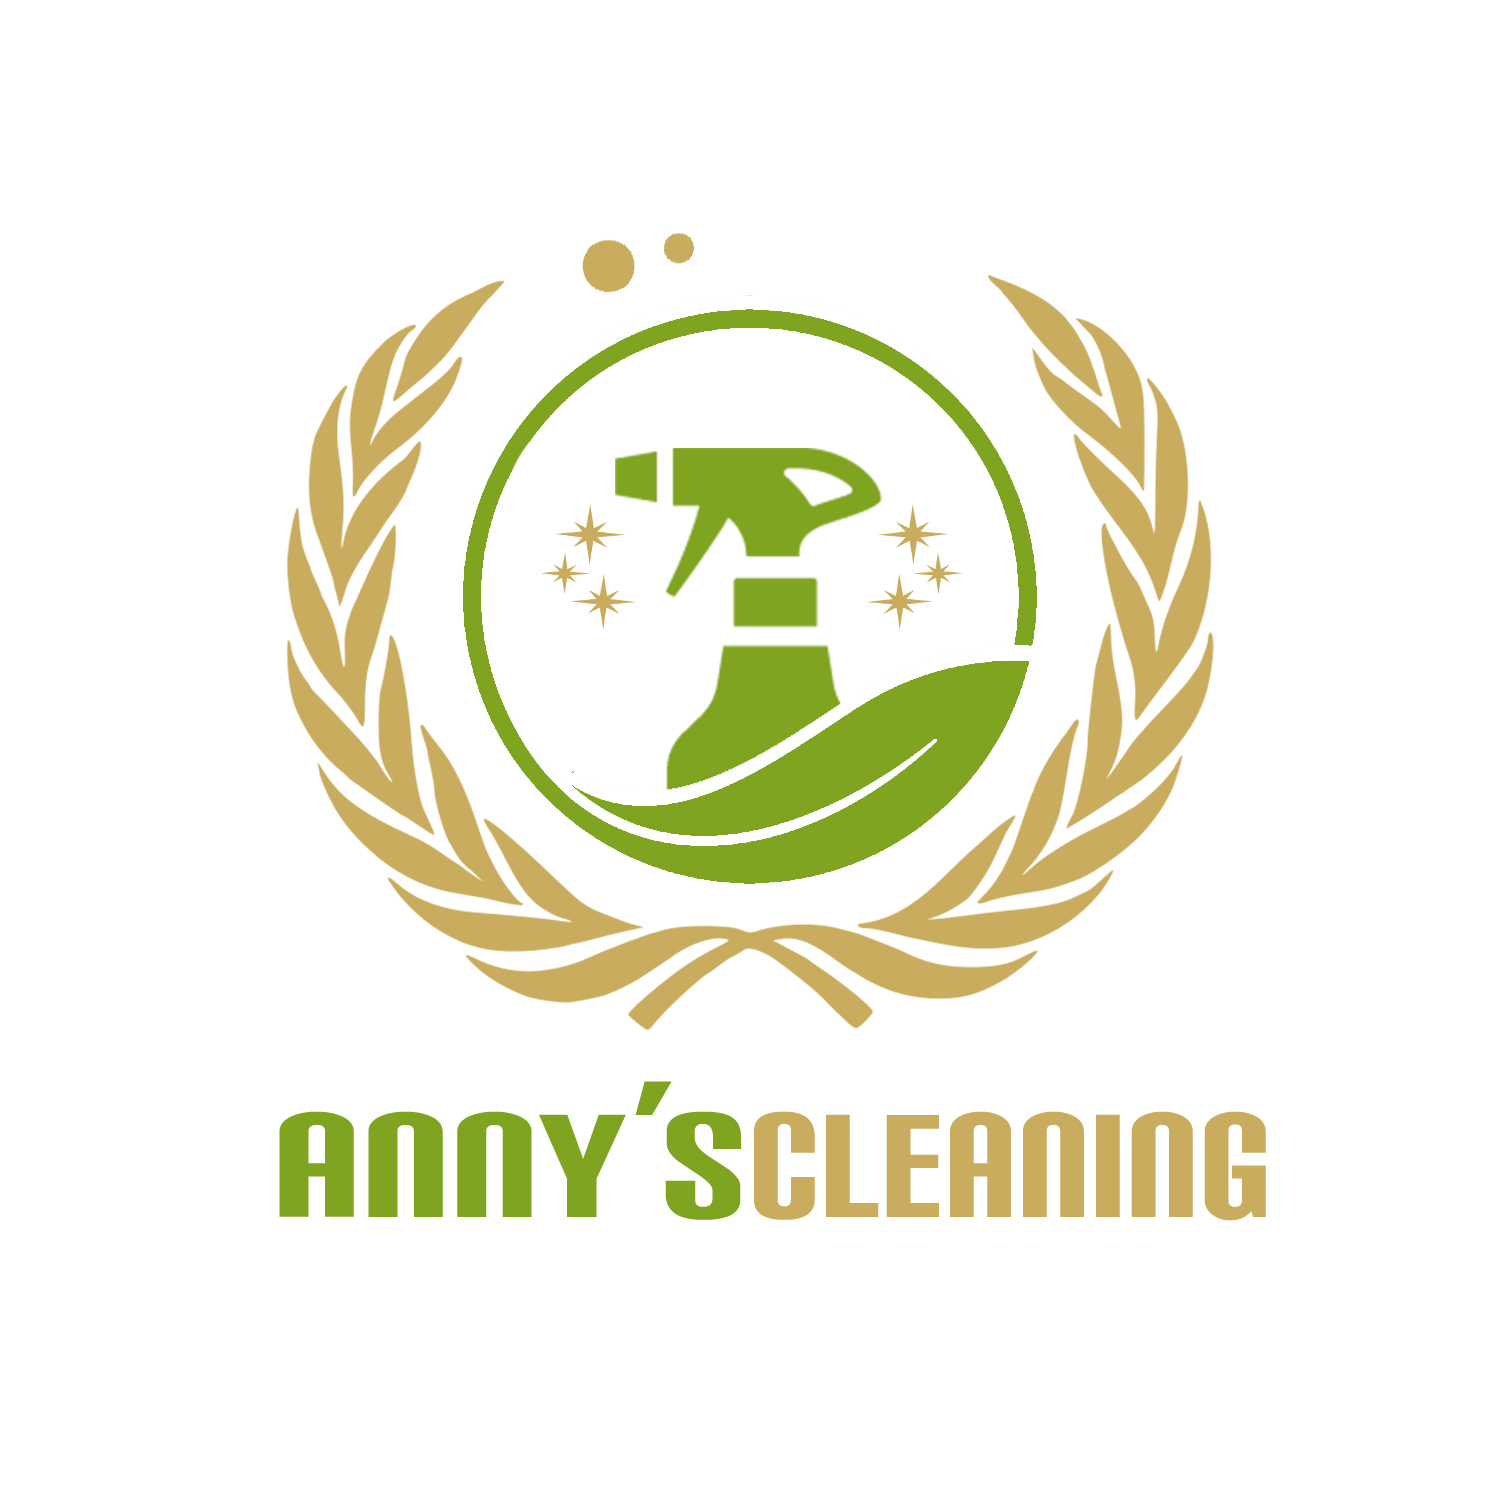 anny's cleaning logo final.jpg